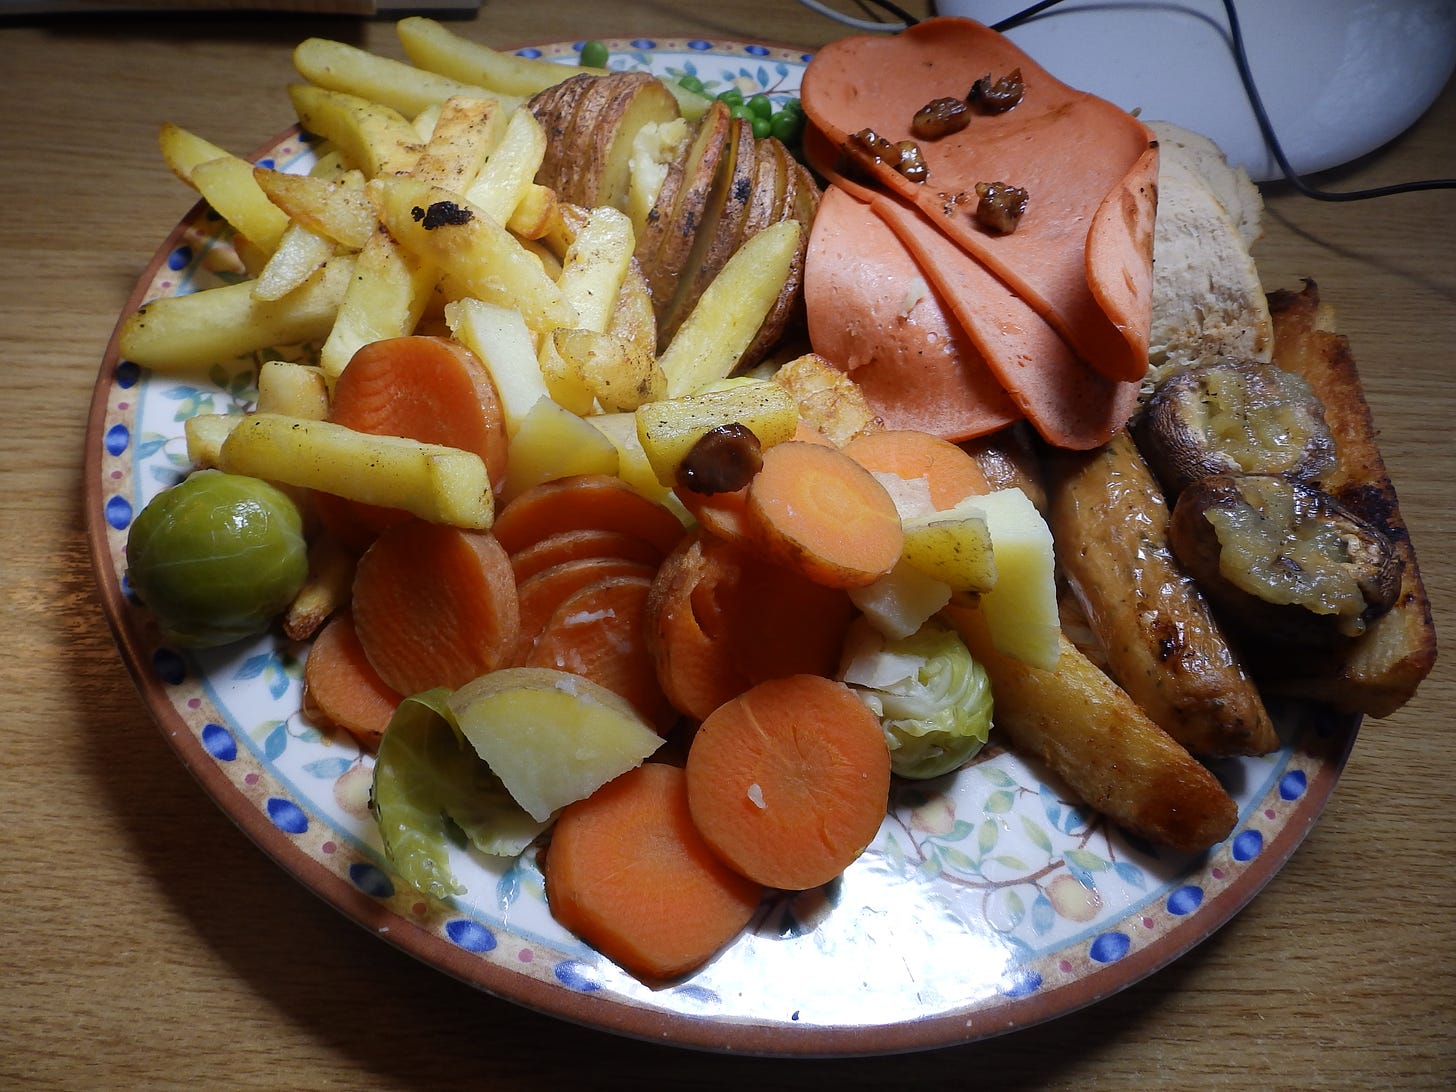 Vegetarian christmas meal with fresh vegetables and vegetarian meat substitutes